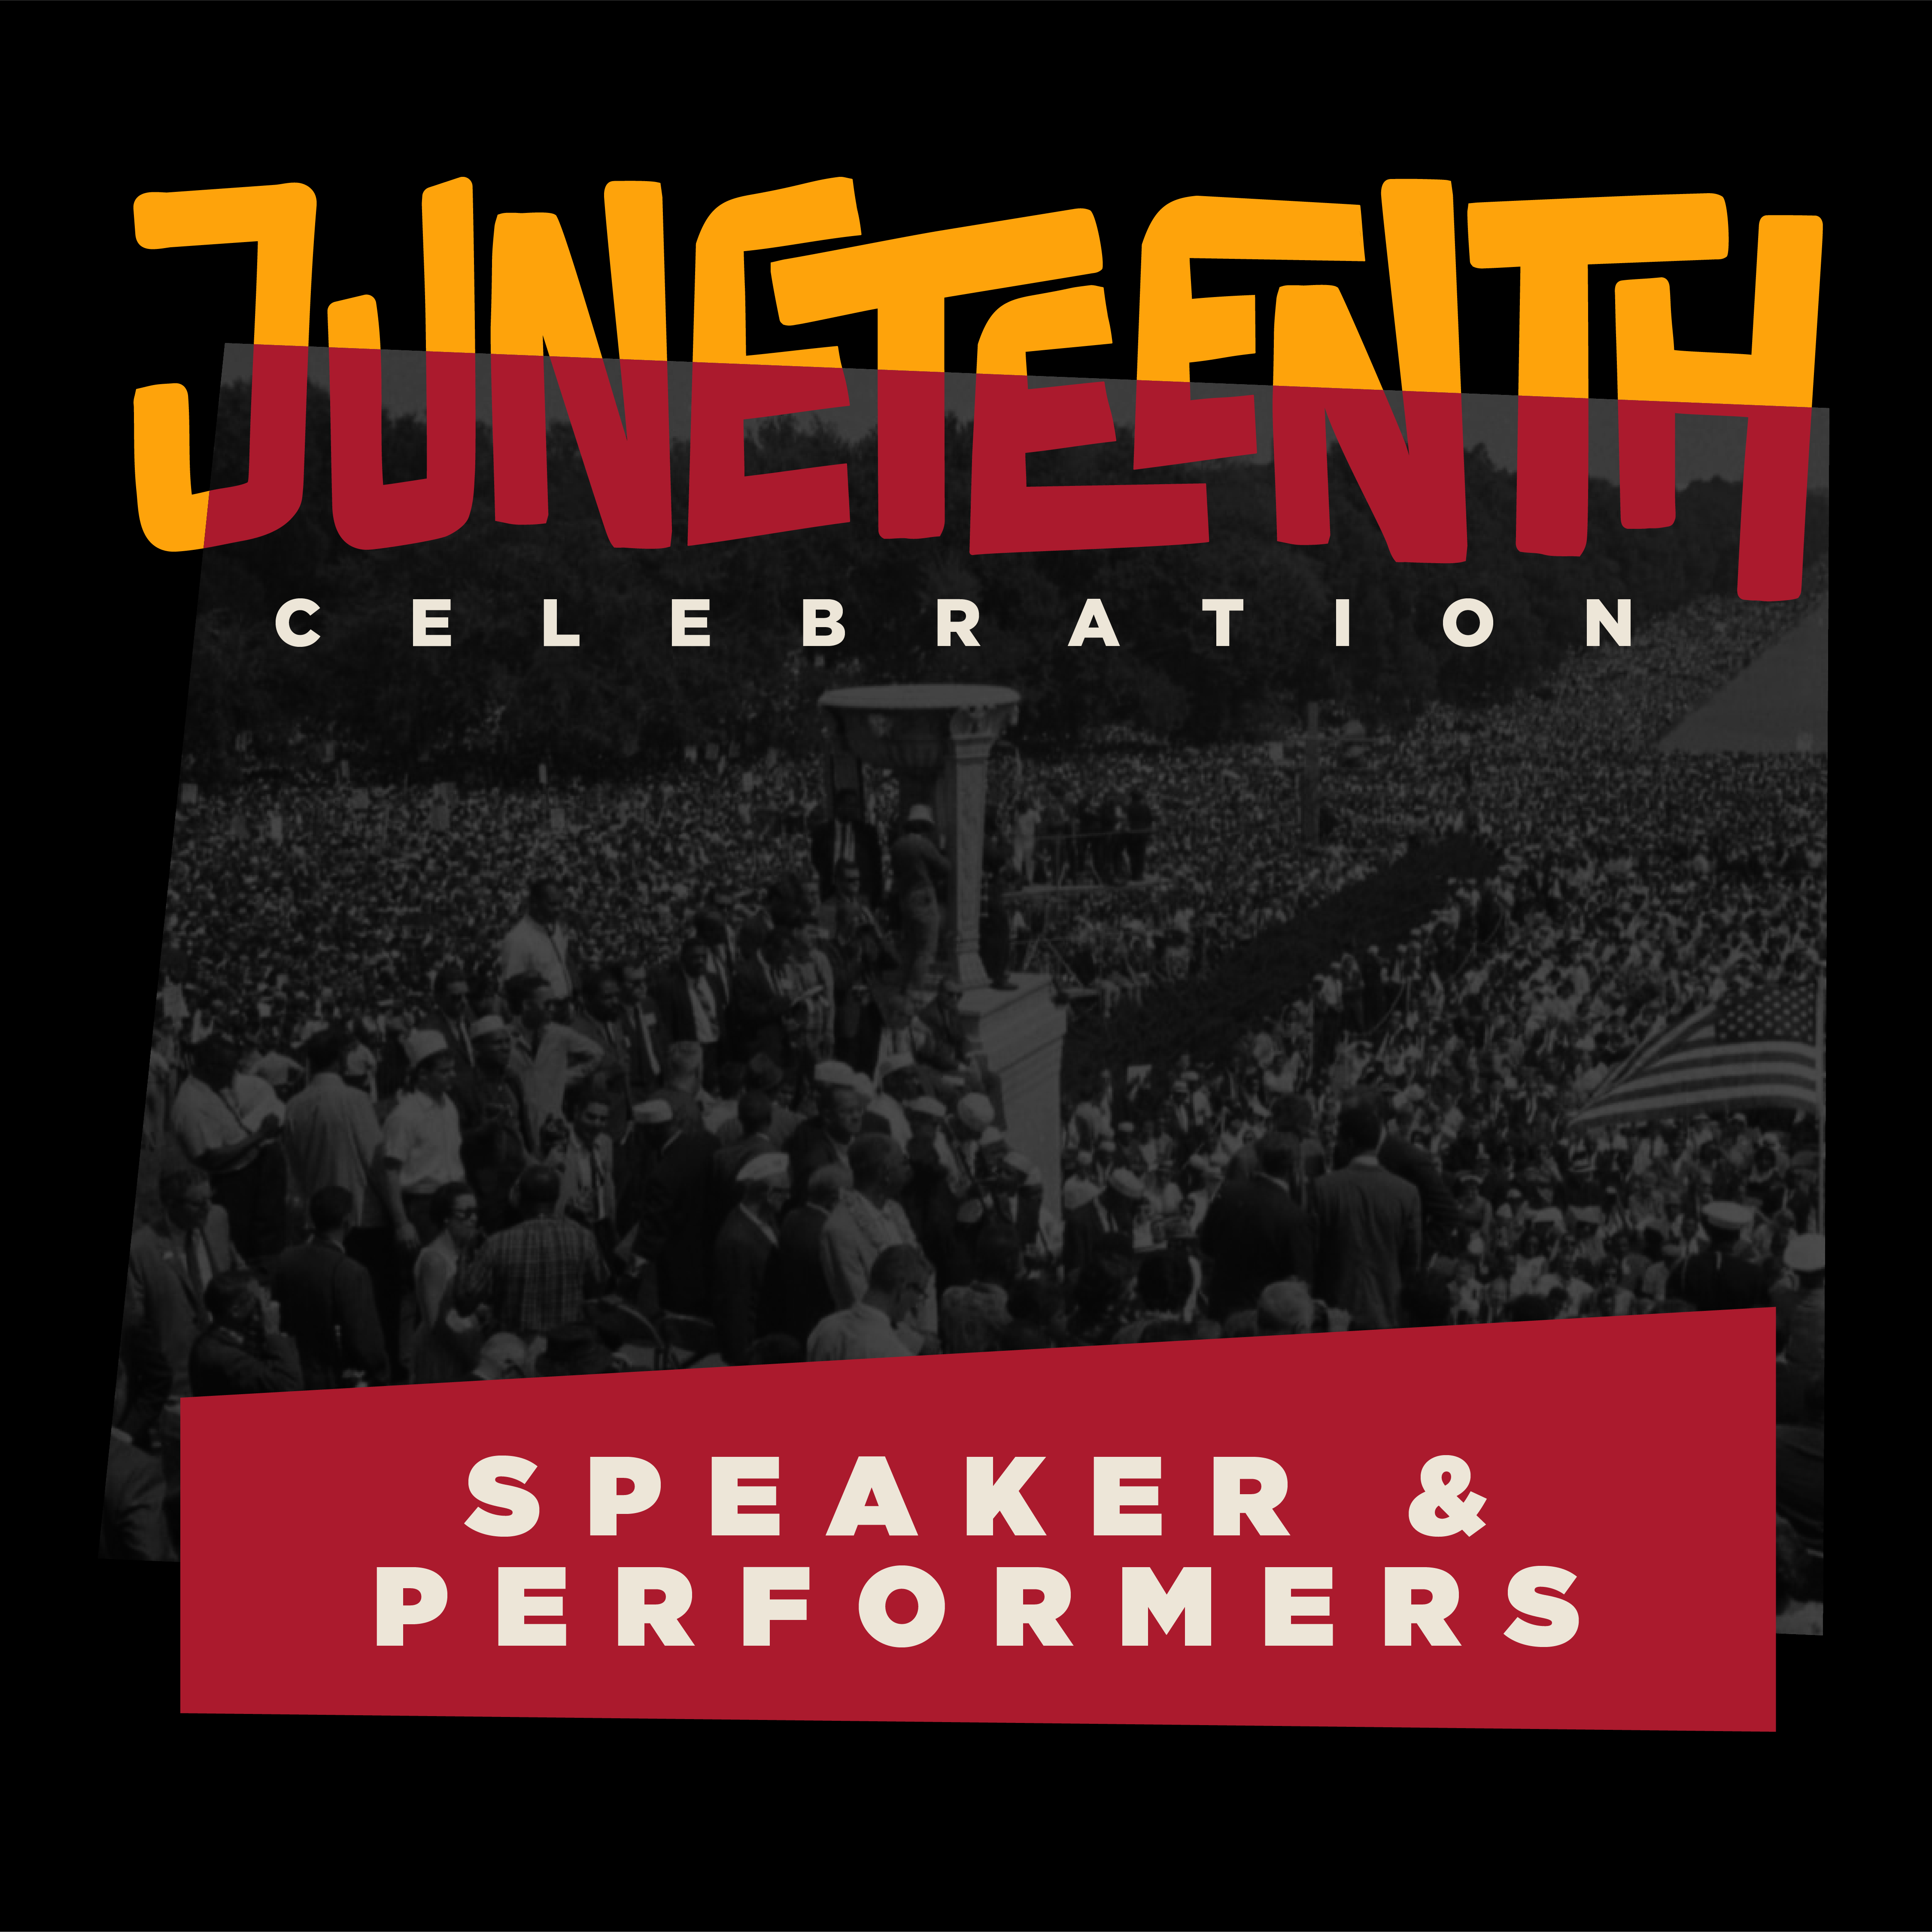 Juneteenth Celebration Speakers and Performers Image